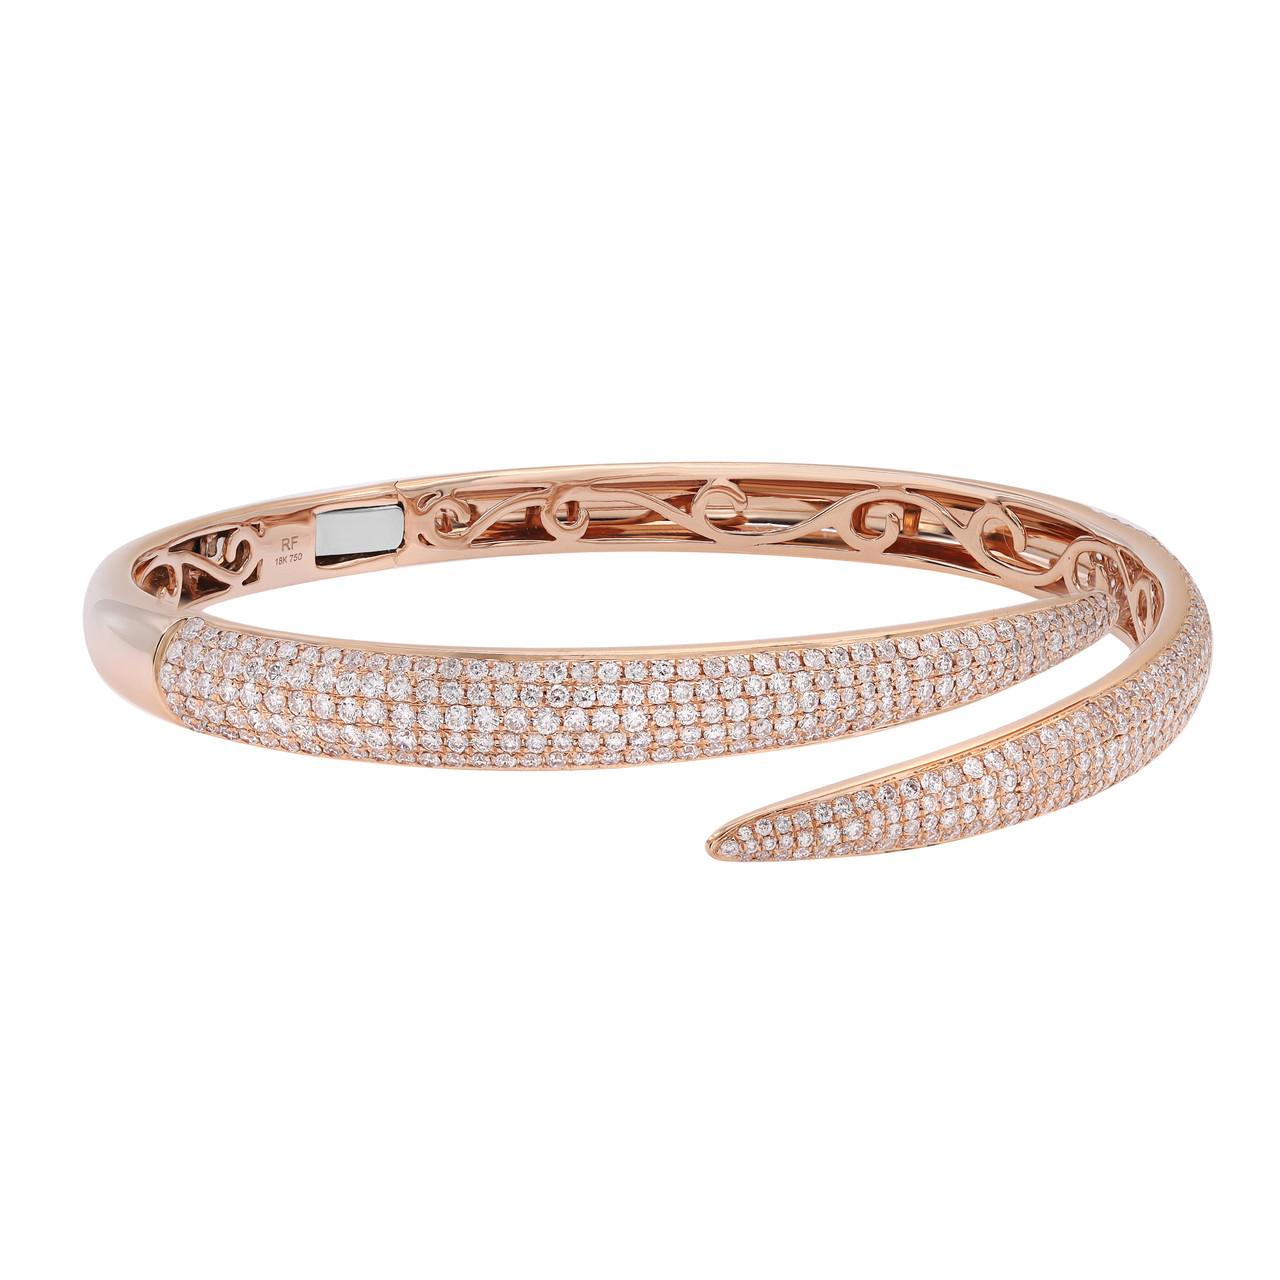 Indulge in the allure of our 3.02 Carat Pave Set Round Cut Diamond Bangle Bracelet, crafted in exquisite 18K rose gold. This stunning piece exudes a delicate and romantic charm. The bracelet features a captivating arrangement of round-cut diamonds,